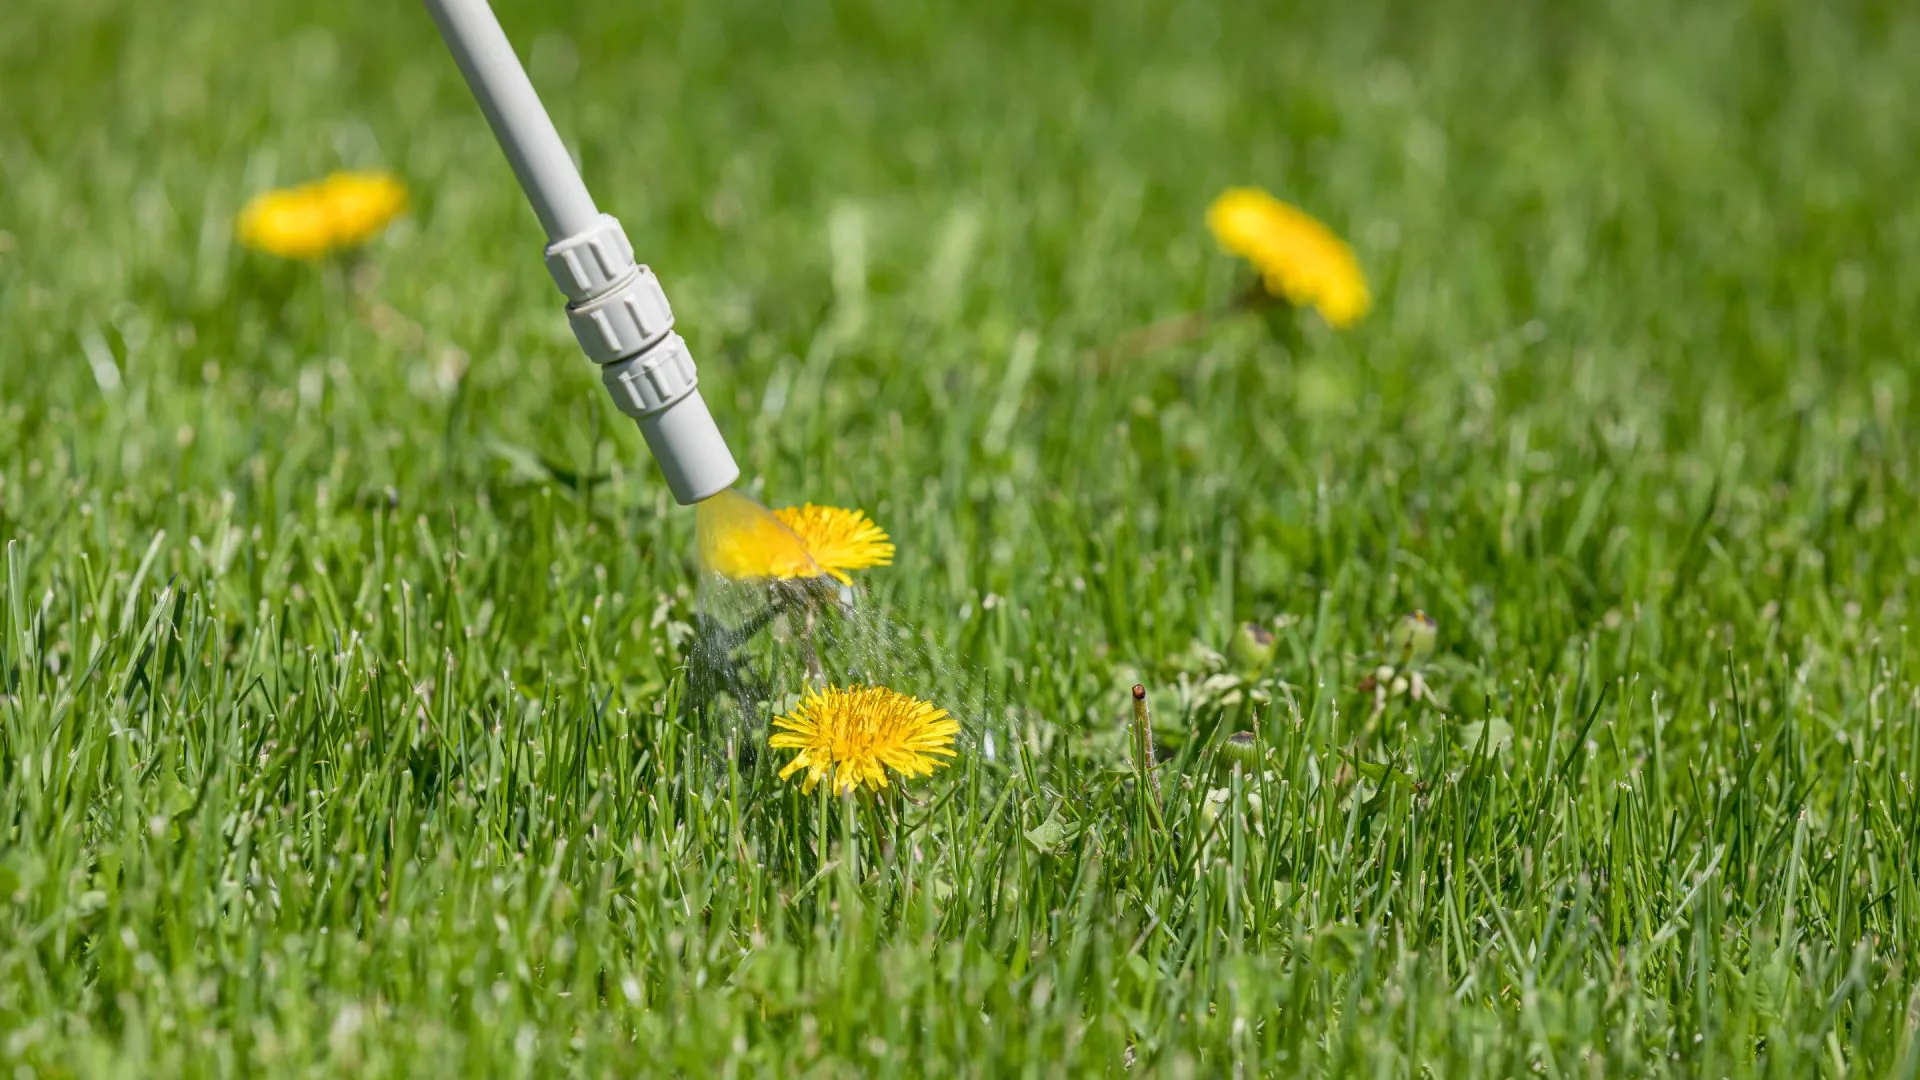 Post-Emergent Weed Control 101 - What Is It & When Should It Be Applied?